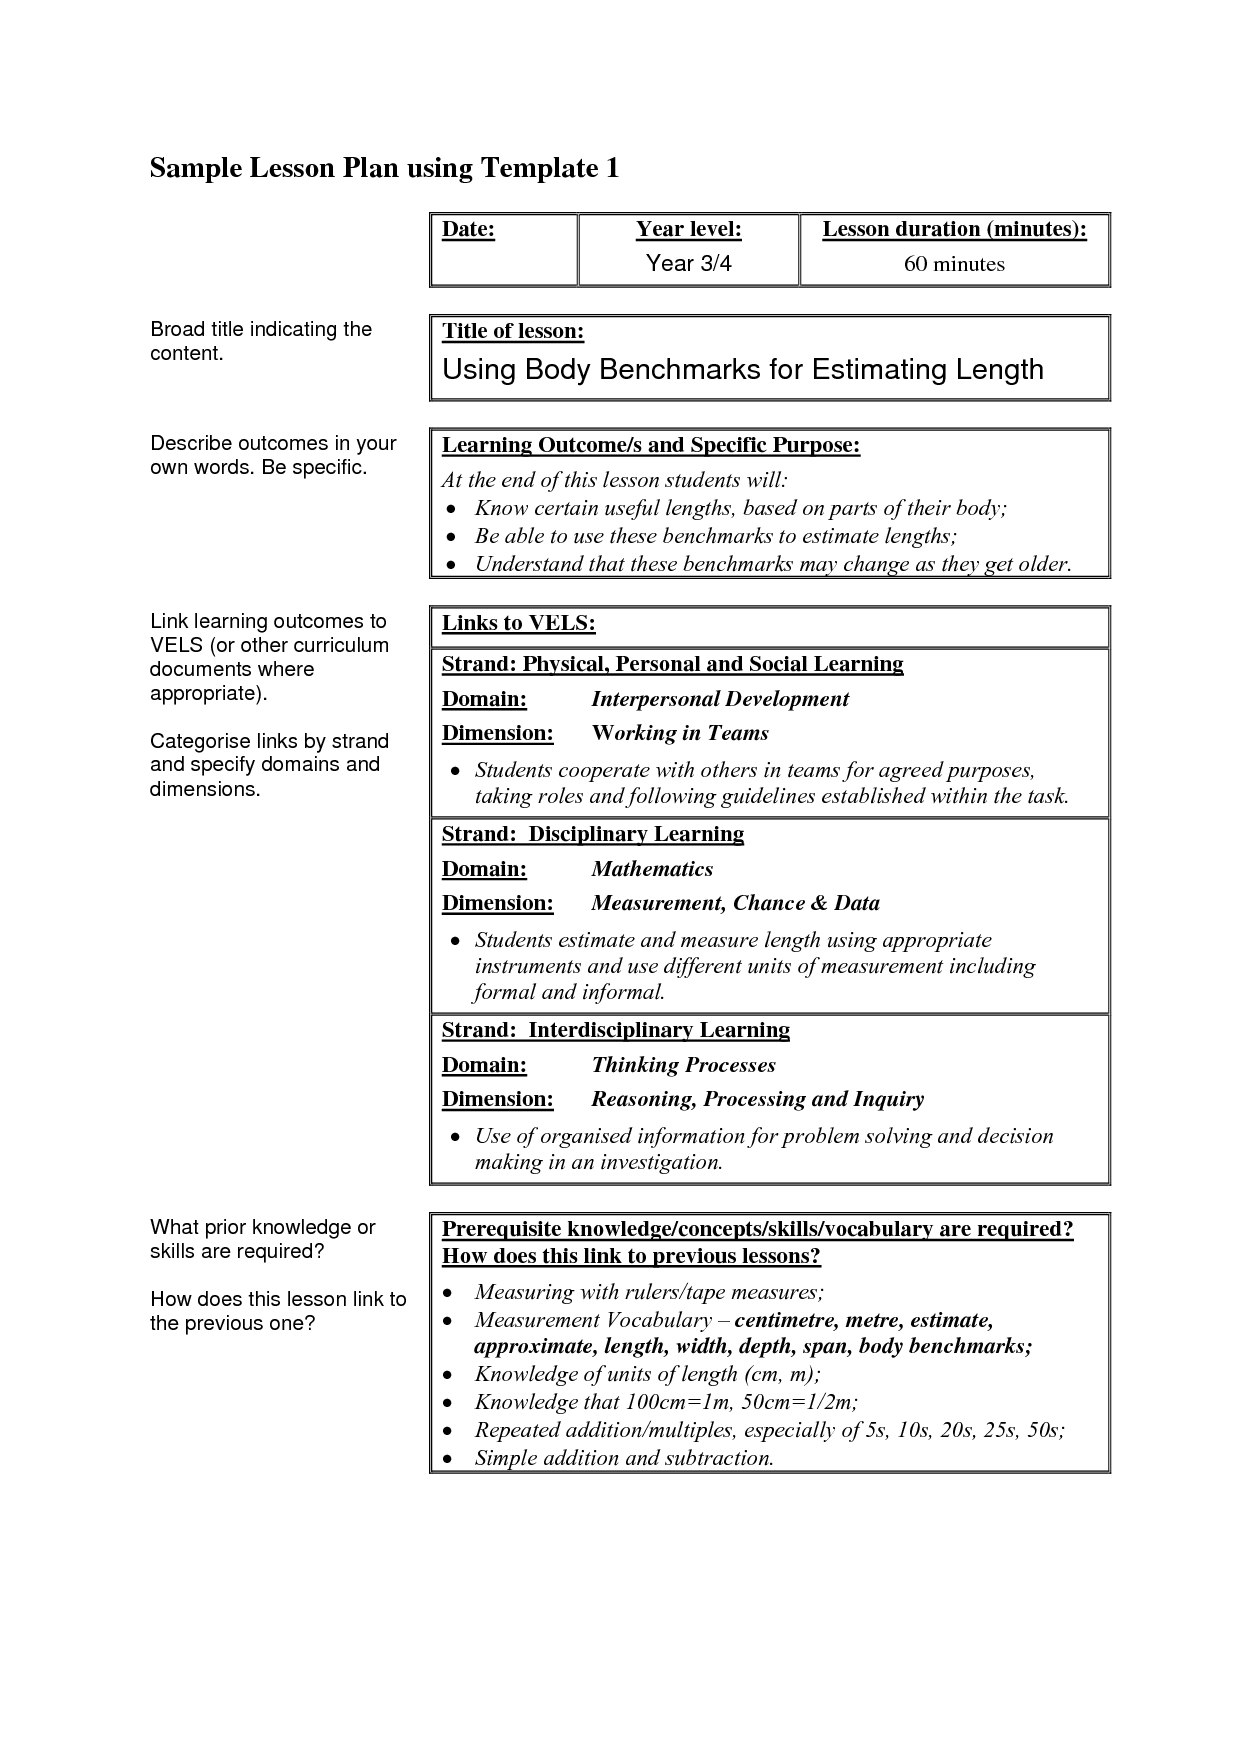 Sample Lesson Plan Using Template 1 Body Benchmarks | Lesson